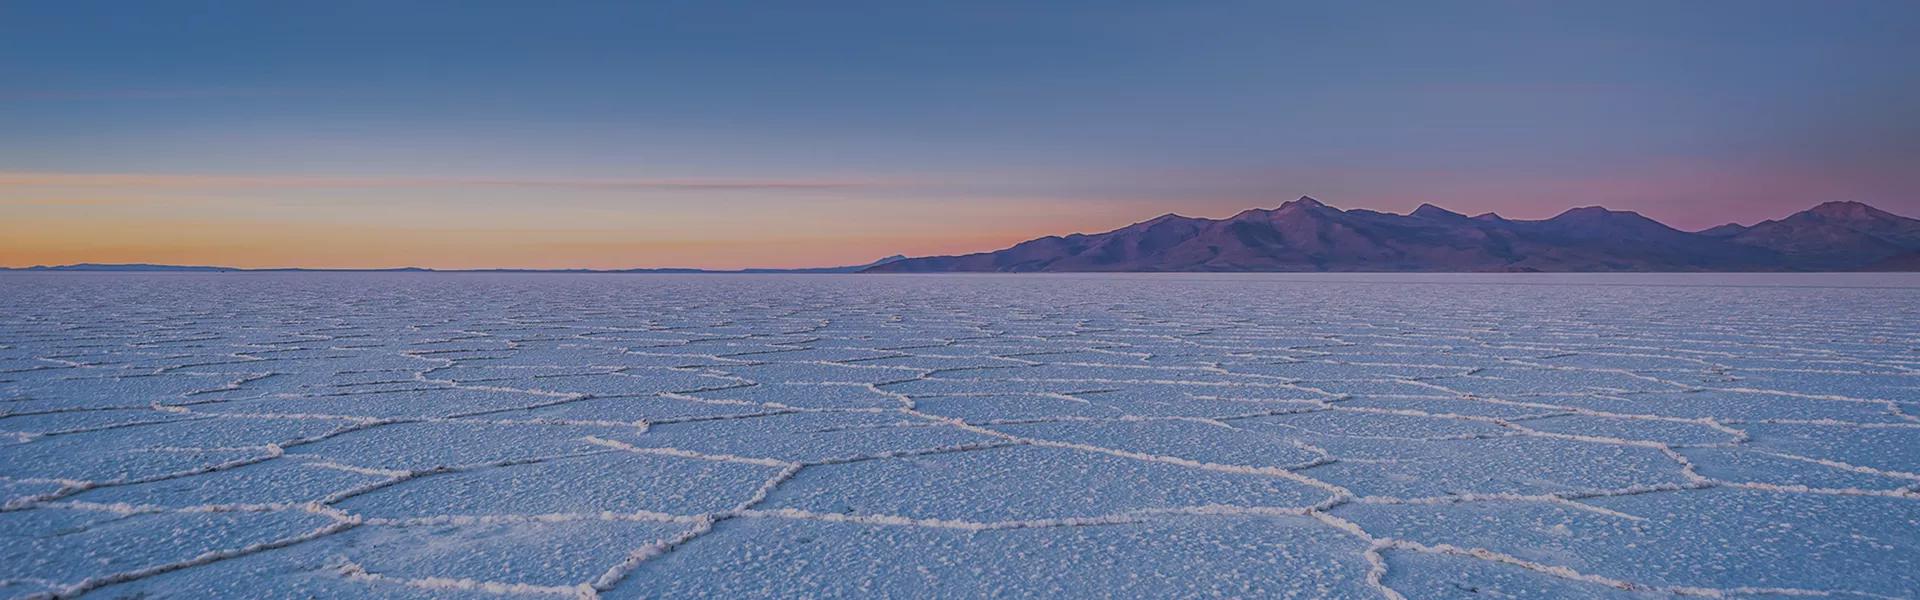 Vast salt flats with mountains in the distance